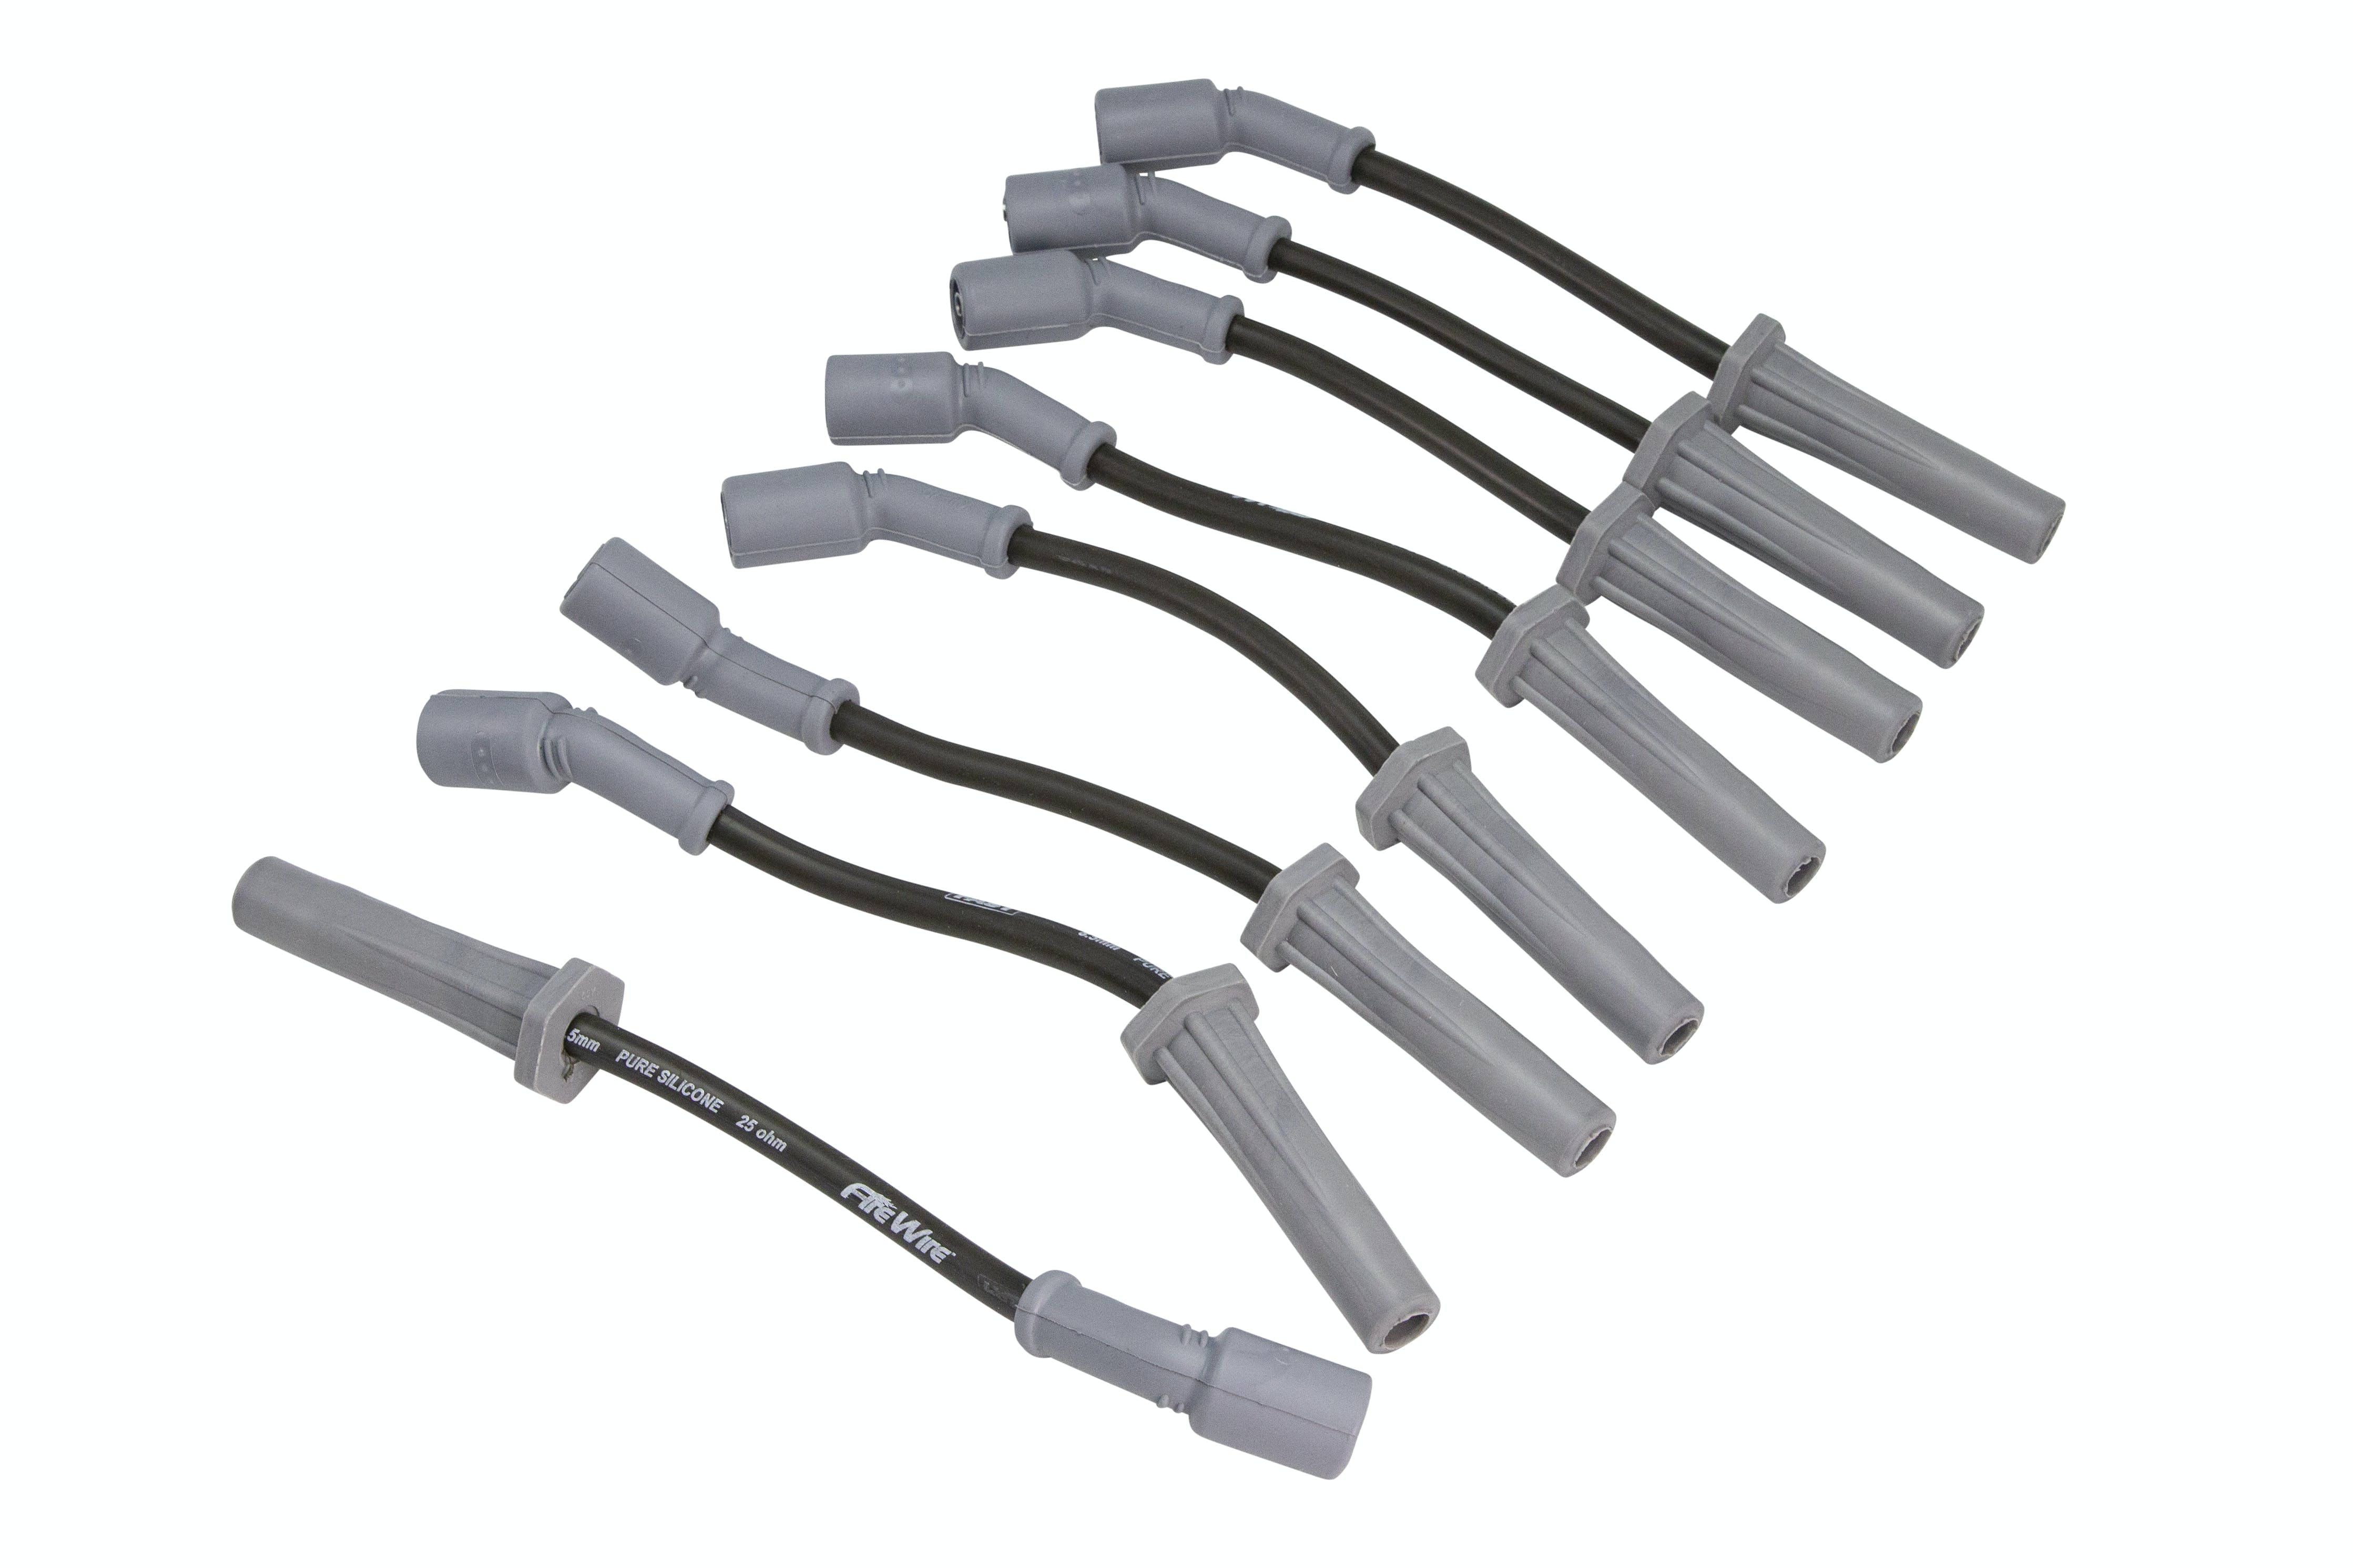 FAST - Fuel Air Spark Technology 255-2419 LS Series Spark Plug Wireset for GM Car with 5.7/6.0/6.2/7.0